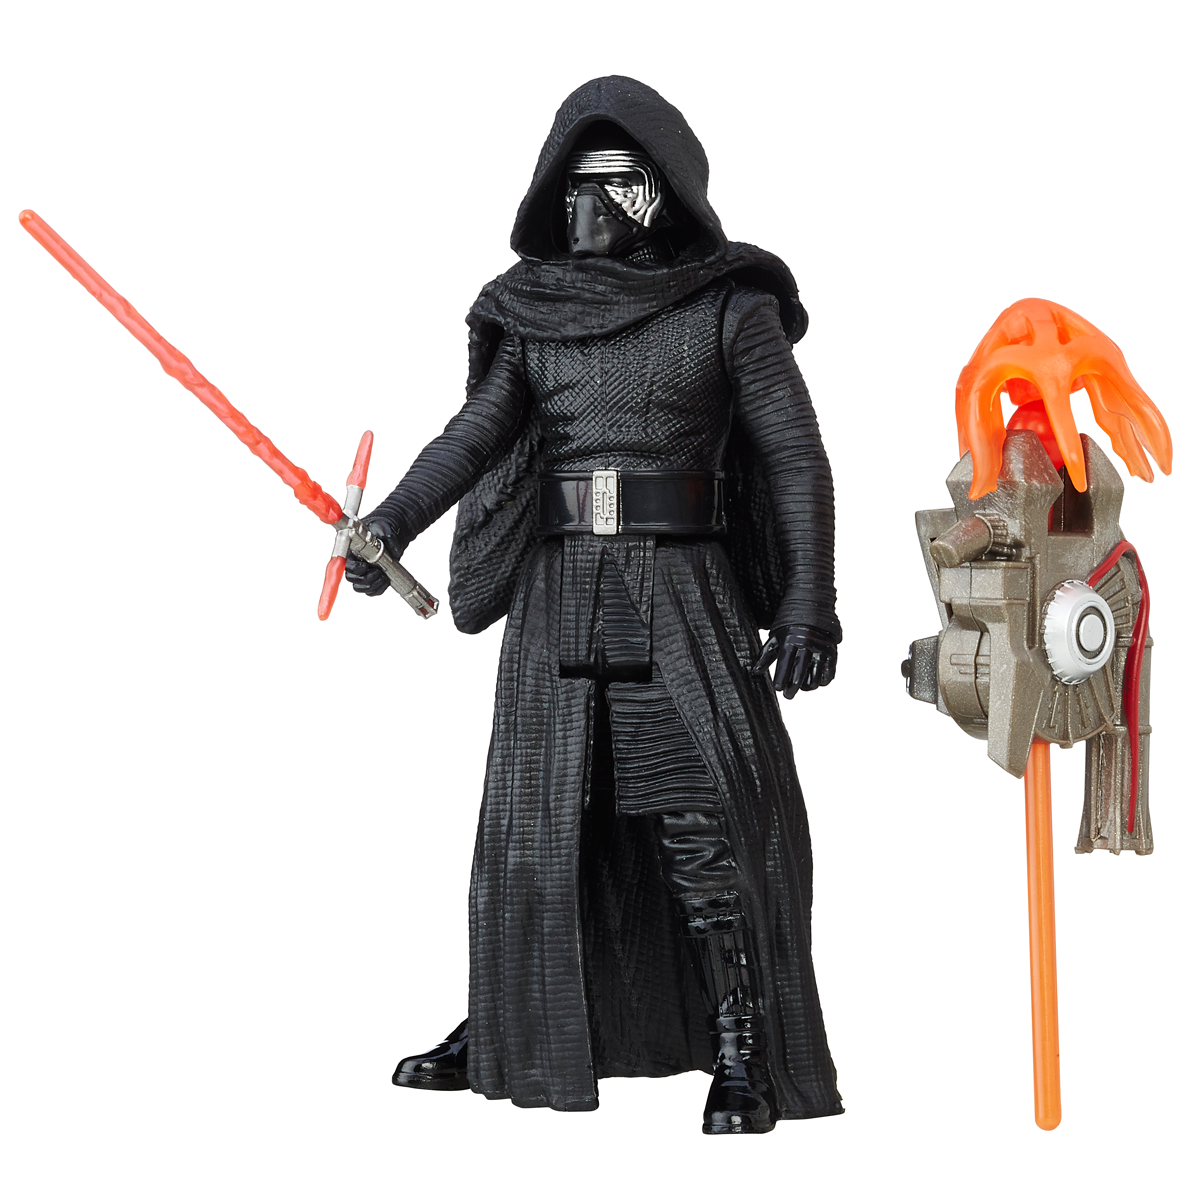 A First Look At Some Of The New Rogue One Action Figures And Playsets